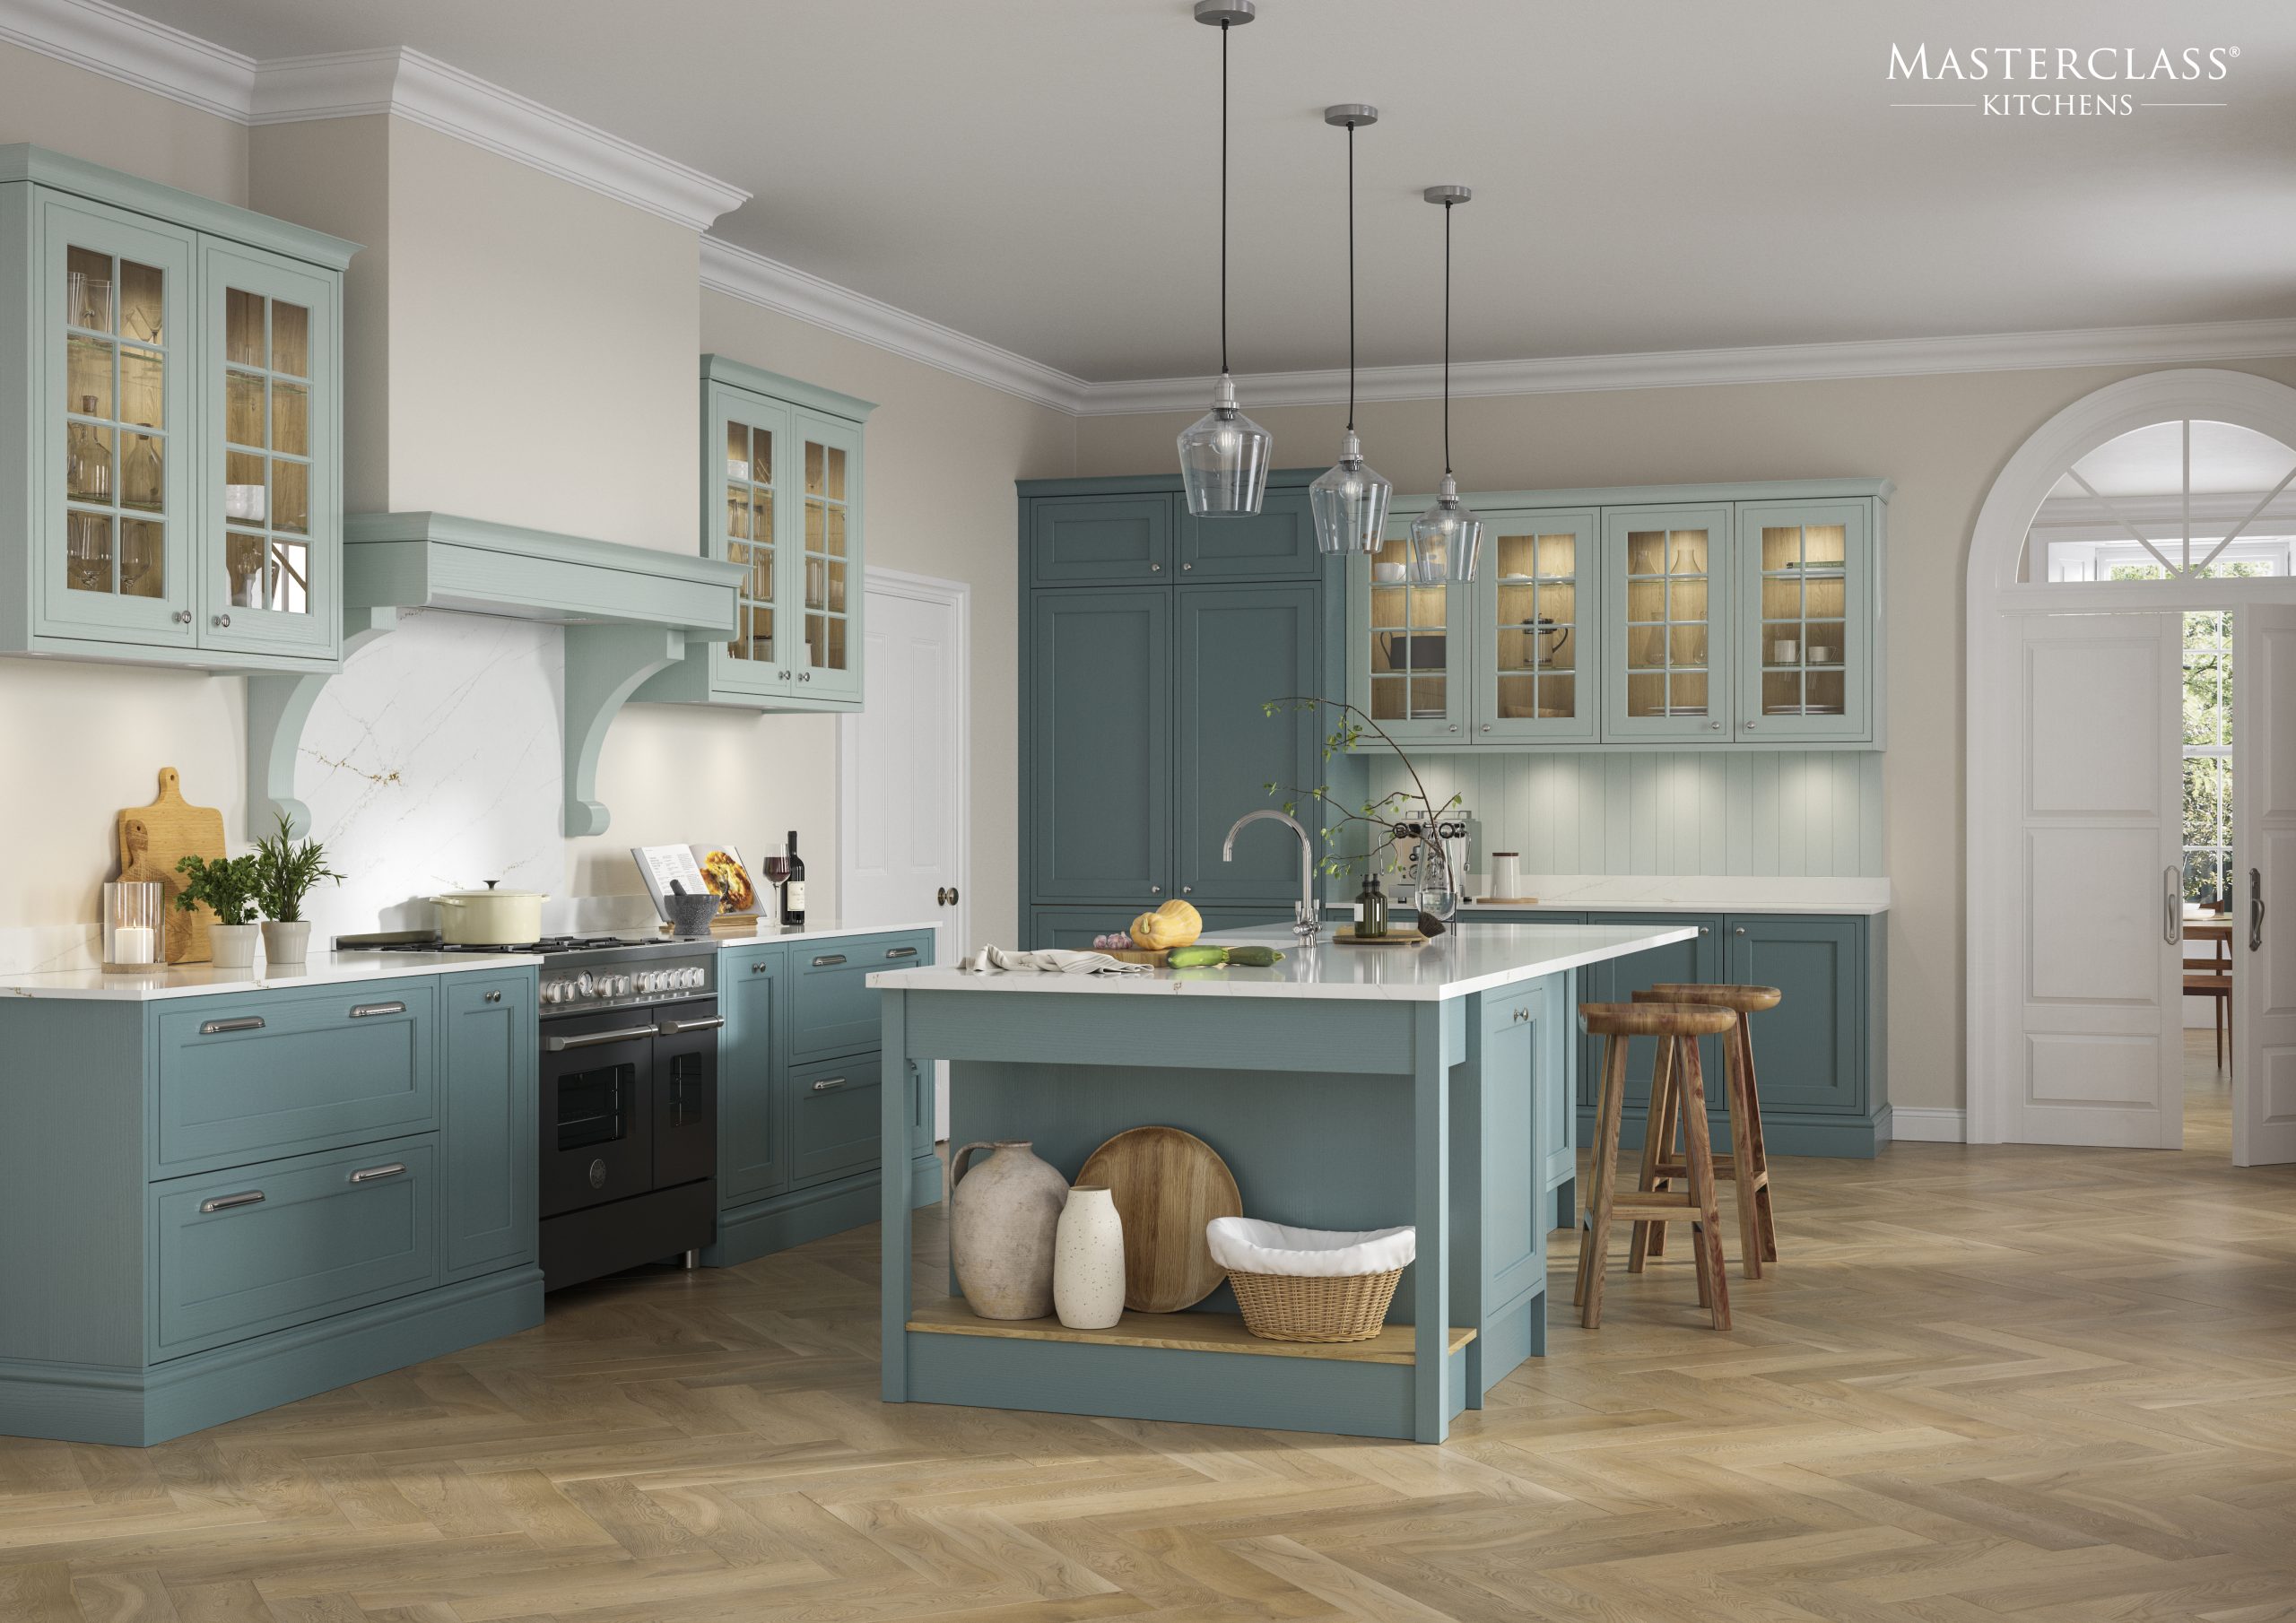 Masterclass Classic Kitchens Hawksmoor Part of our Timeless Collection. Features our innovative cabinet as standard Available with The Signature Collection of storage Constructed using FSC® certified wood Lifetime Guarantee on Blum Hinges